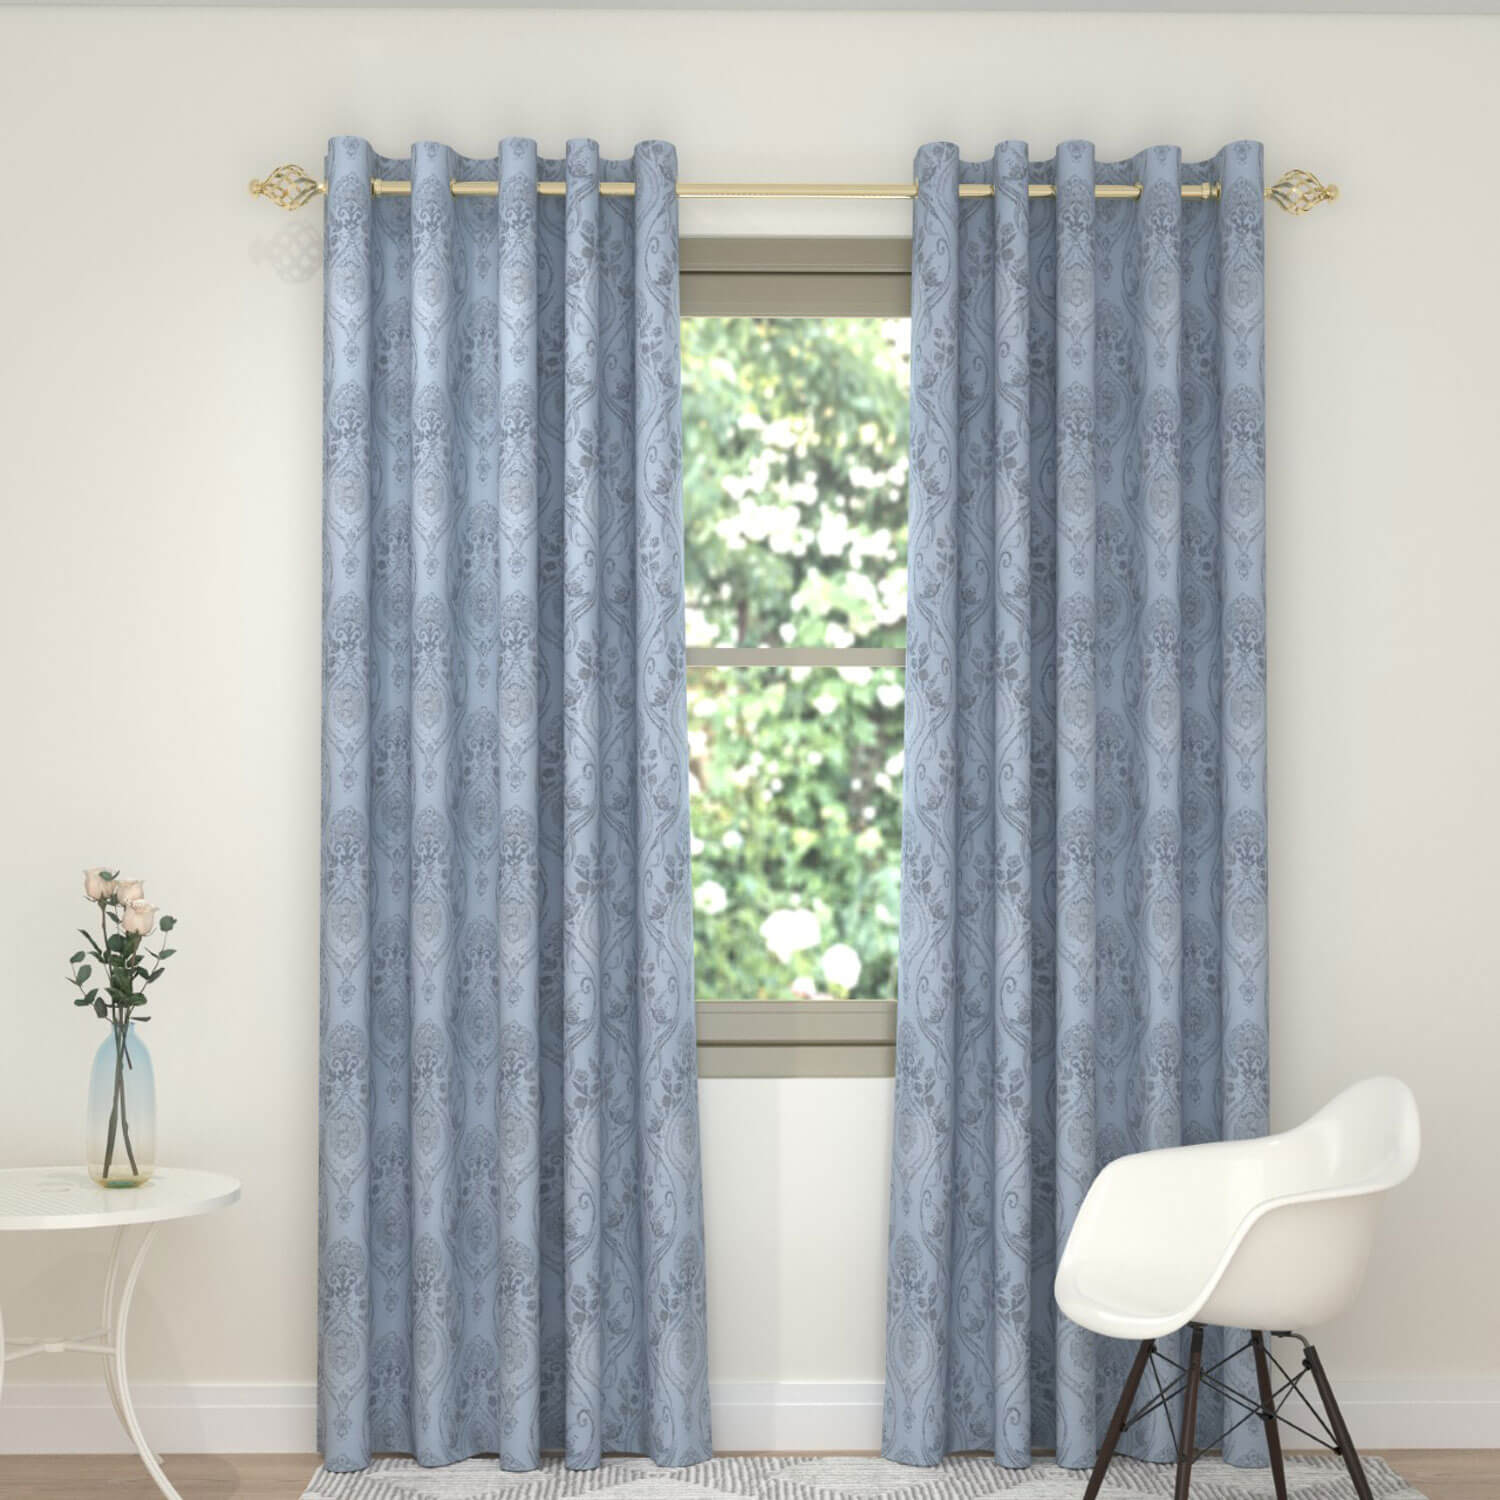 Imperial Interlined Readymade Curtain - 90x90 - Duckegg